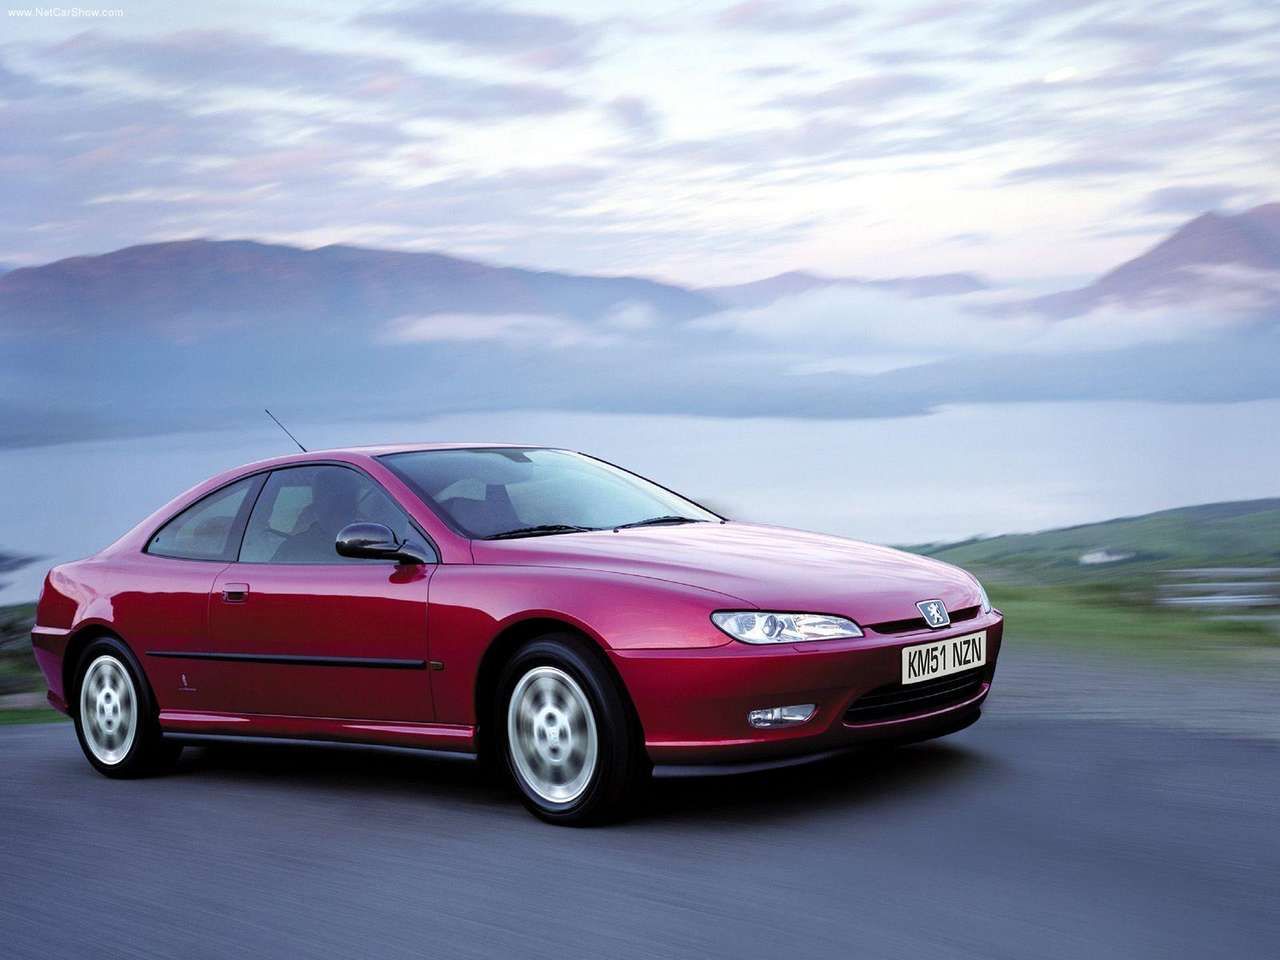 Peugeot-406_Coupe-2001-1280-01